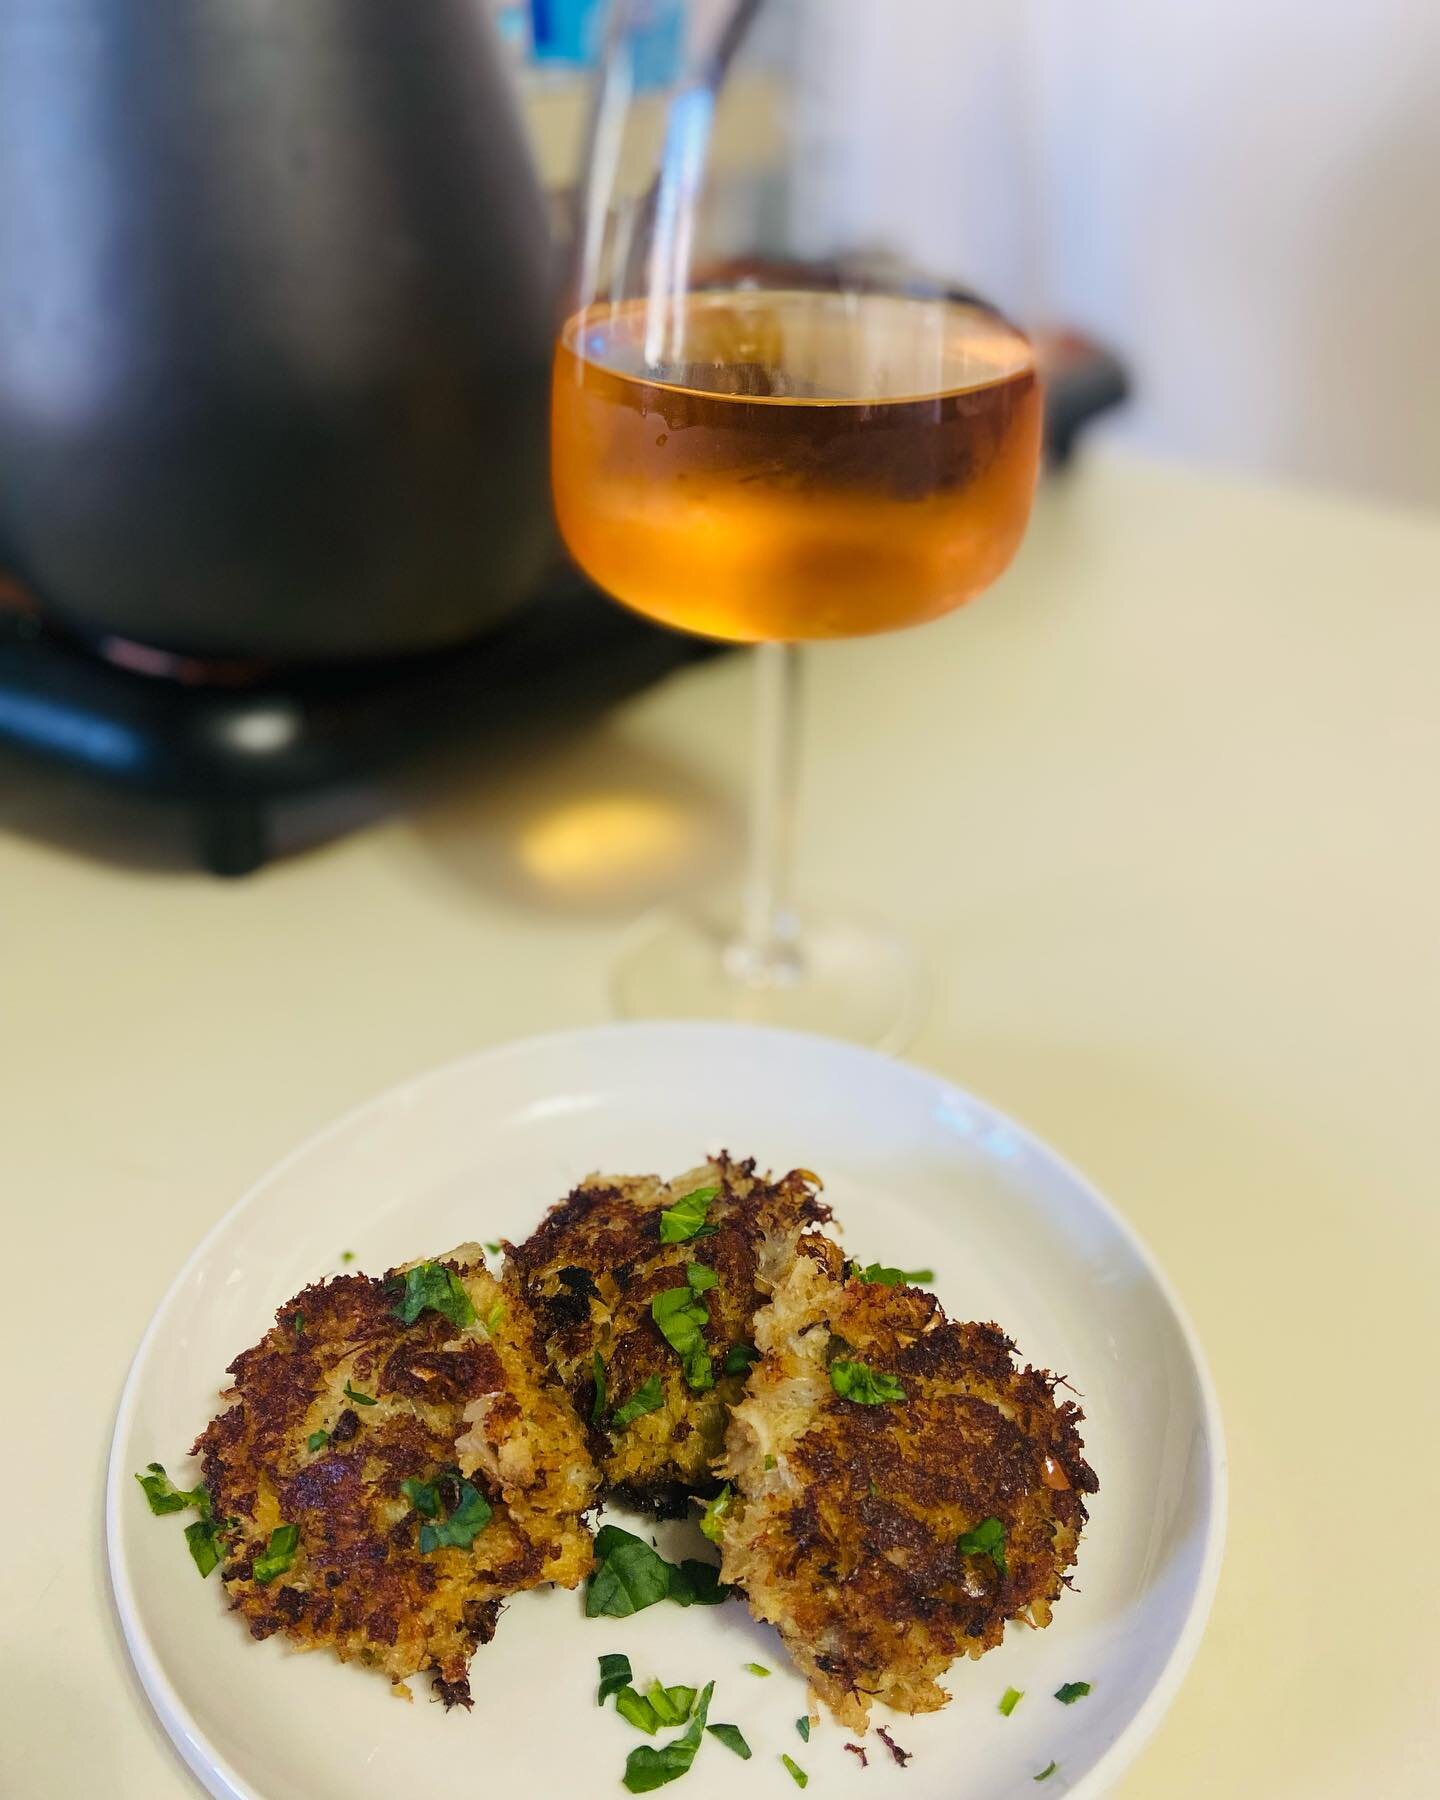 Orange wine and Crab Cakes 
What a lovely pairing and a great way to celebrate your day.

Orange wine also called macerated or skin contact wine, made with white grapes using the same process used to make red wine. The grapes are left to macerate wit